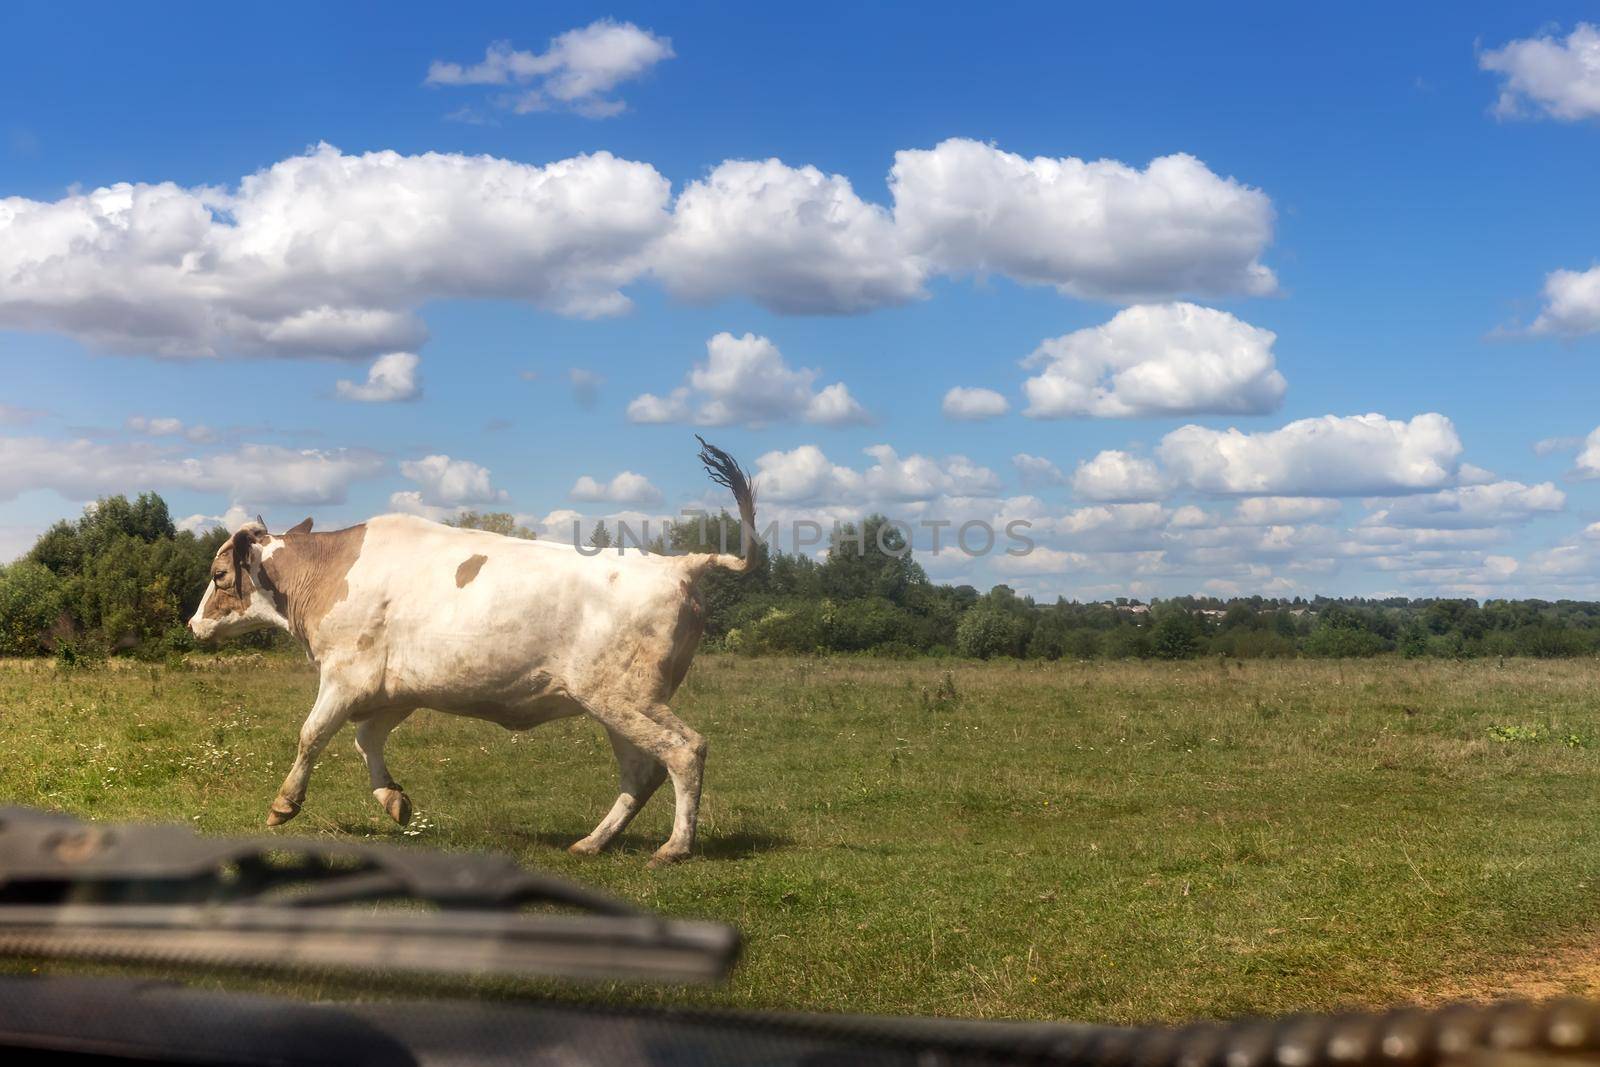 Cow crossing the road in front of the car. by georgina198